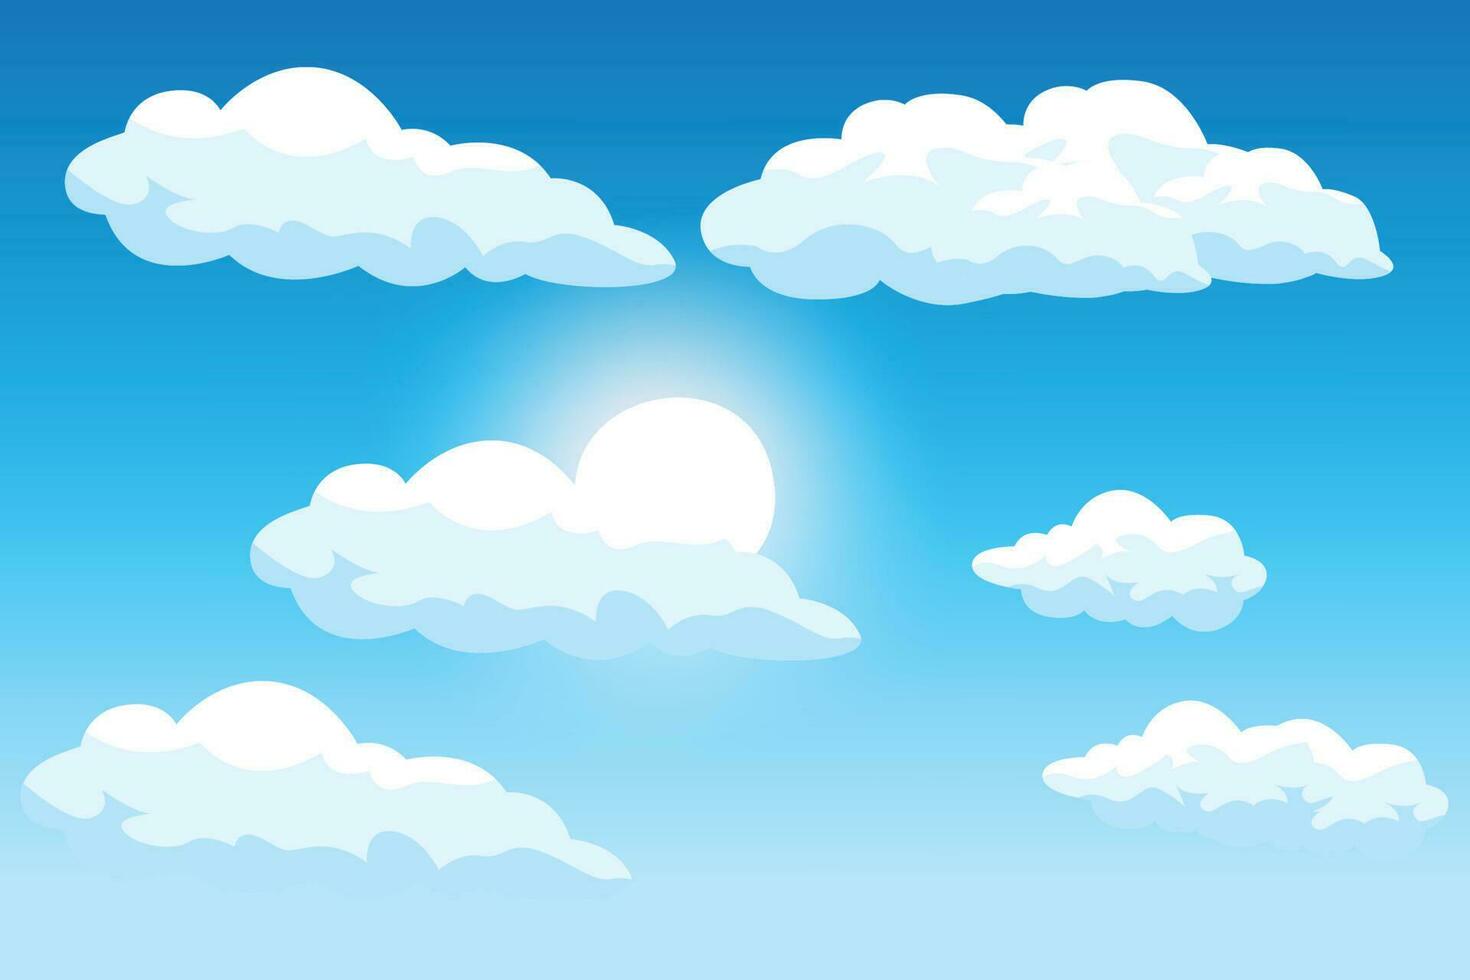 Cloud Background Design, Sky Landscape Illustration, Decoration Vector, Banners And Posters vector